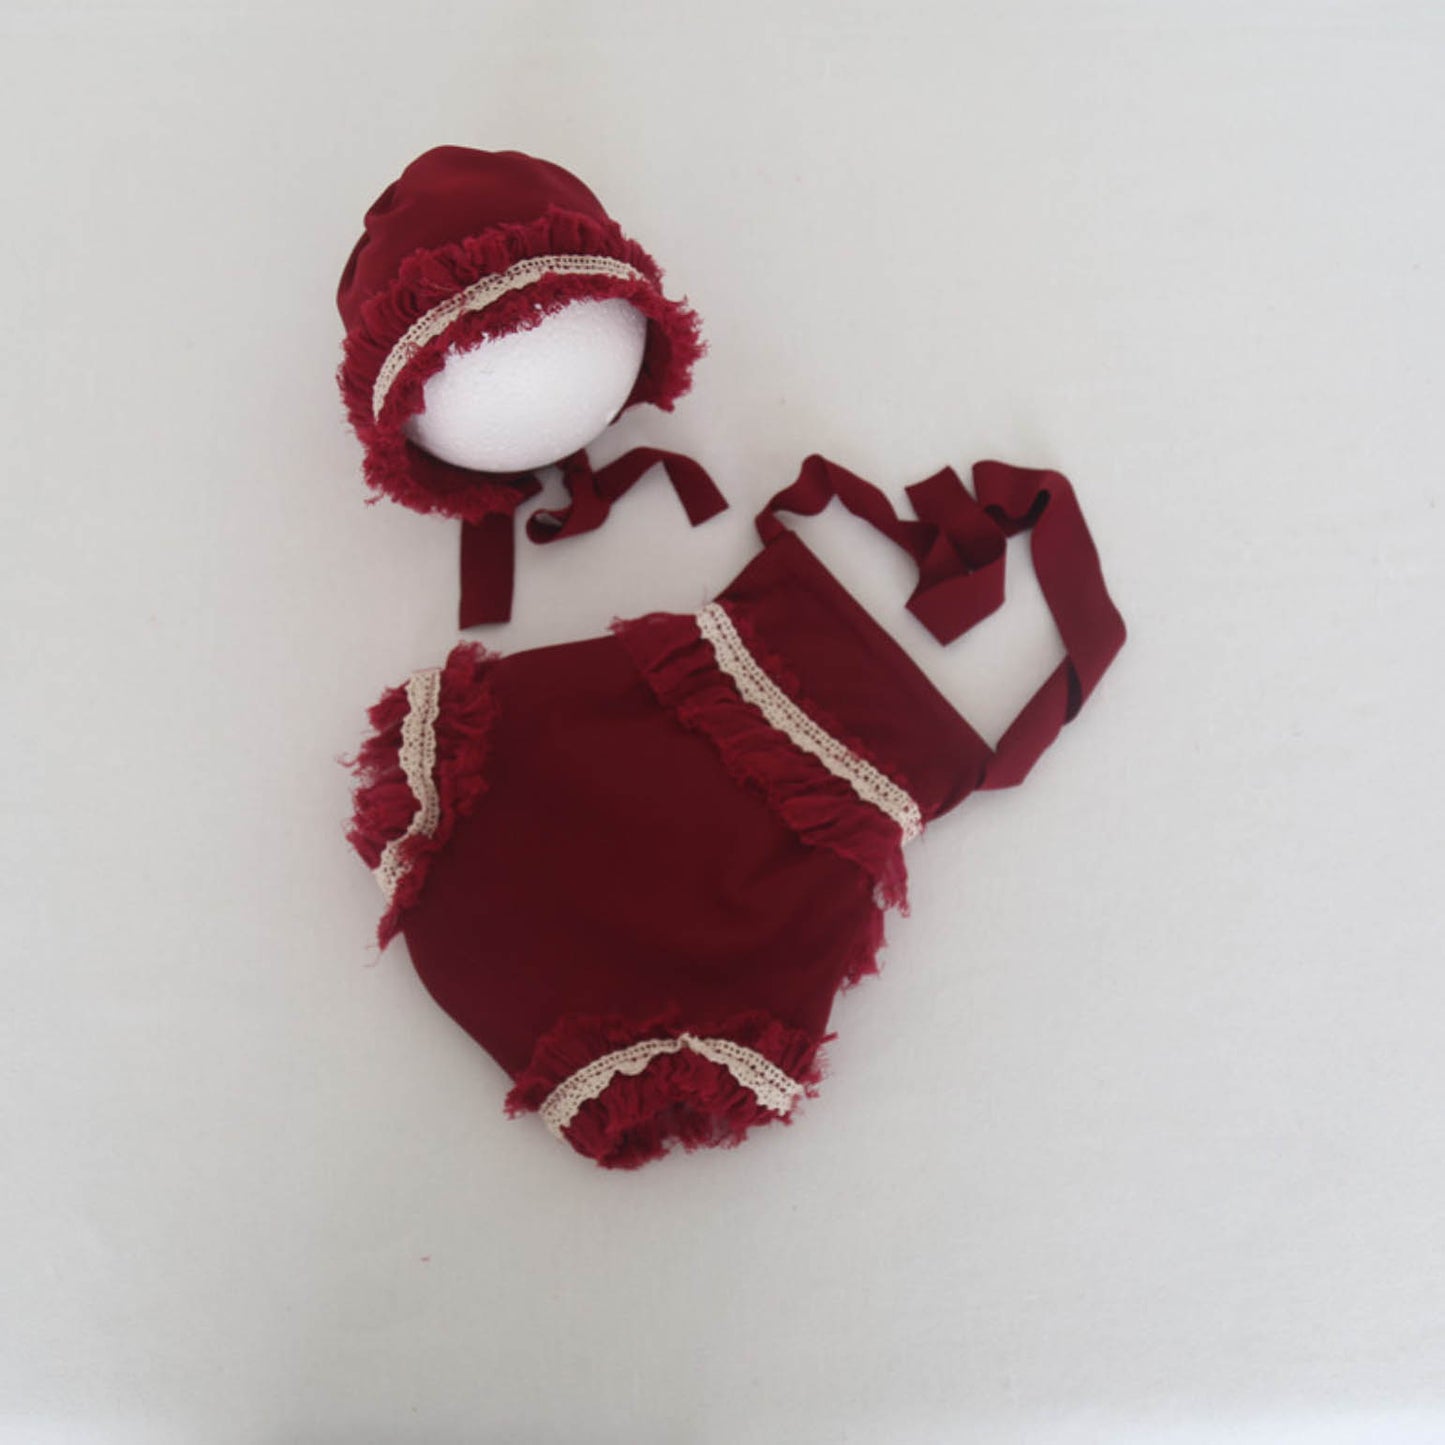 Fox 2pcs Studio Props Red Wine Newborn Baby Red Hat Strap Fabric Outfits - Foxbackdrop